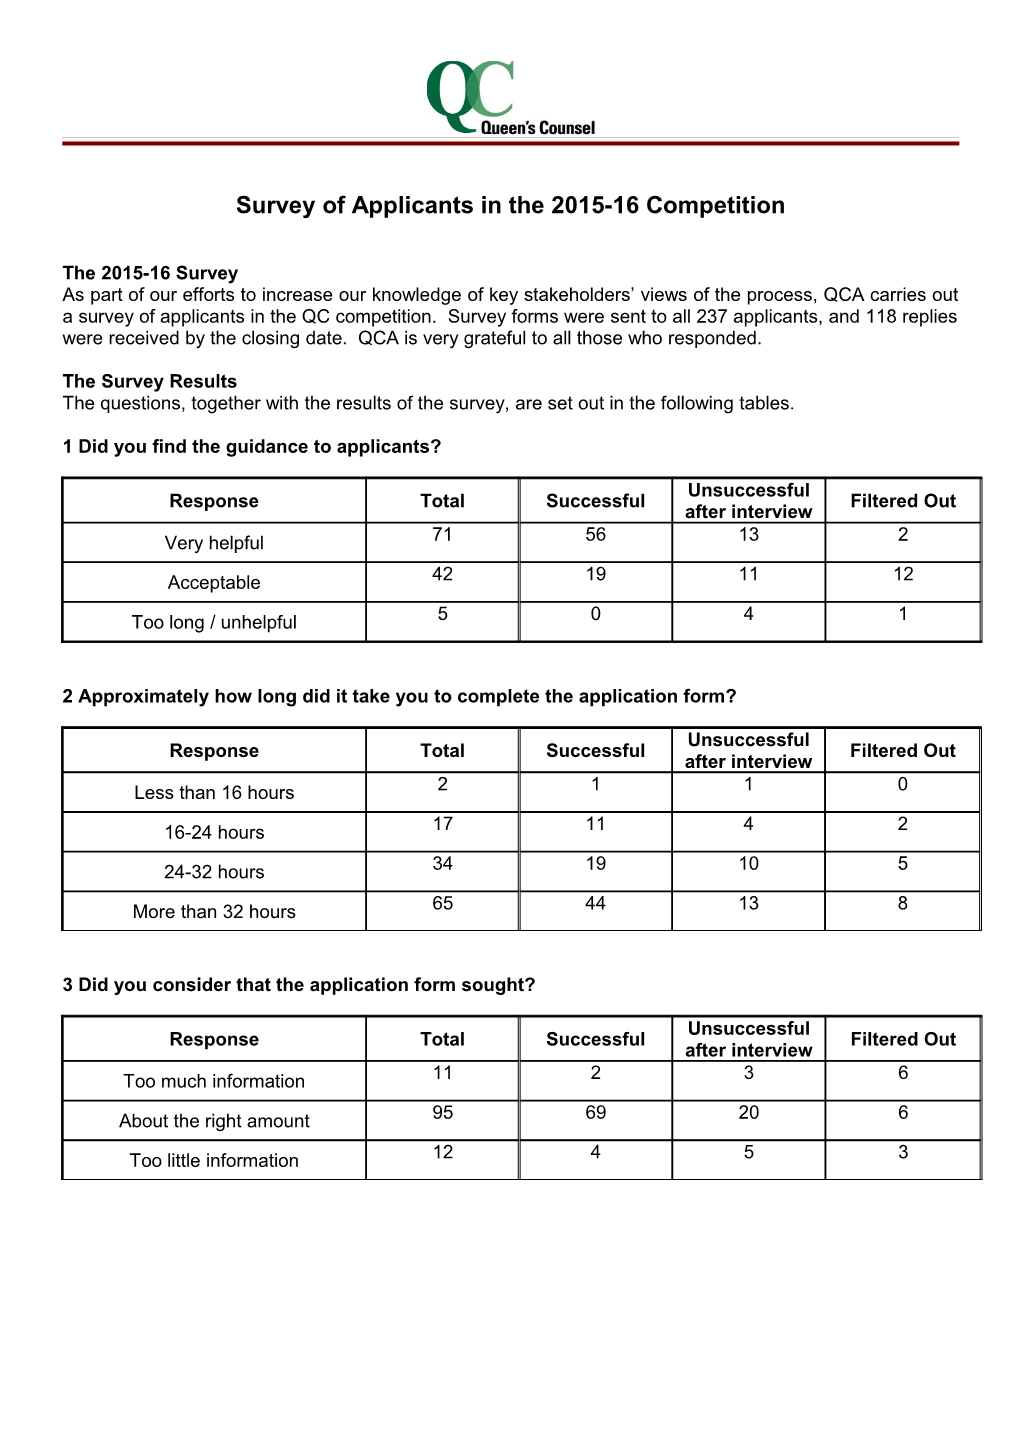 Survey of Applicants in the 2015-16 Competition